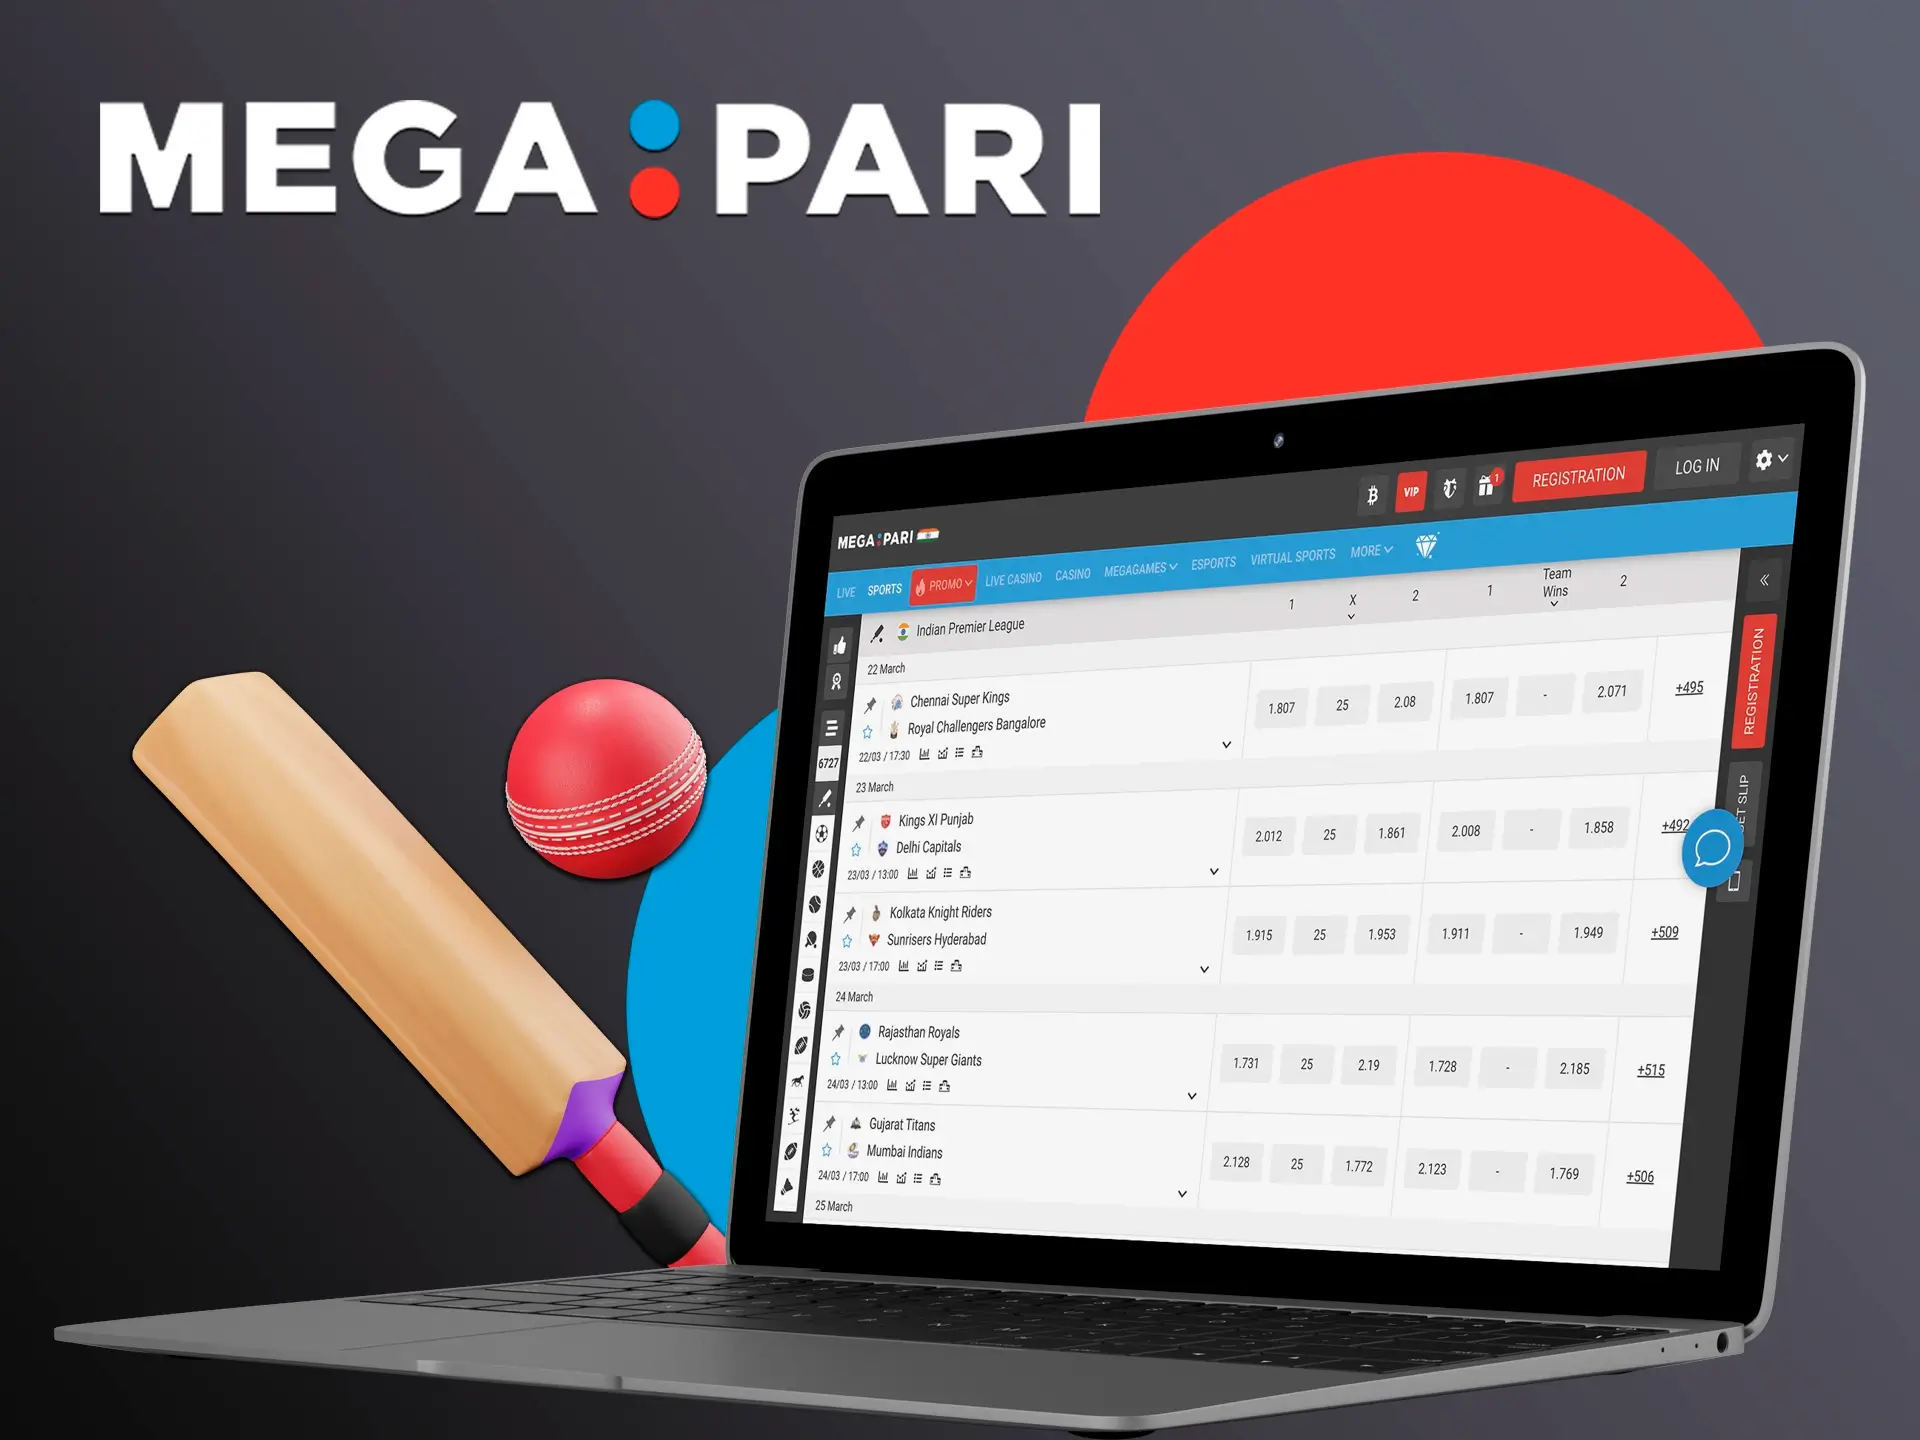 Use your experience and skills when betting on the Indian Premier League at Megapari Casino.